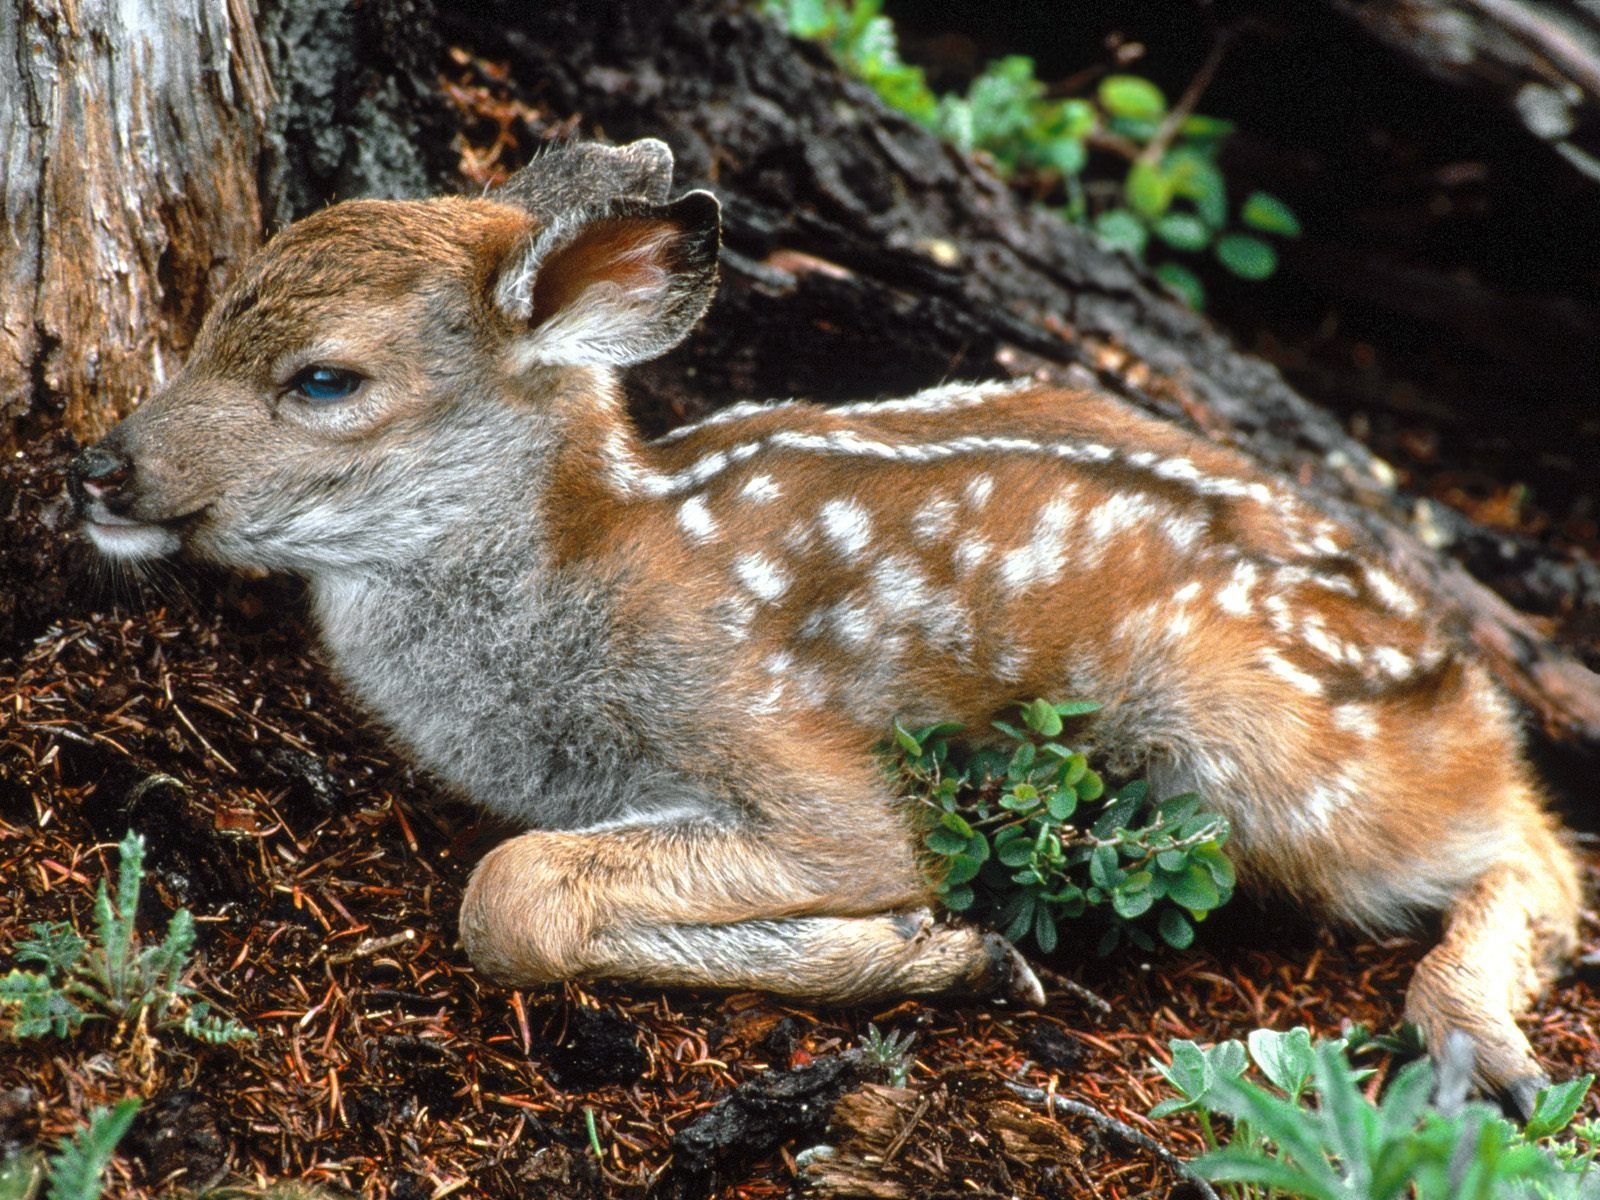 Black tailed Deer Fawn Wallpaper Baby Animals Animals Wallpaper in jpg format for free download